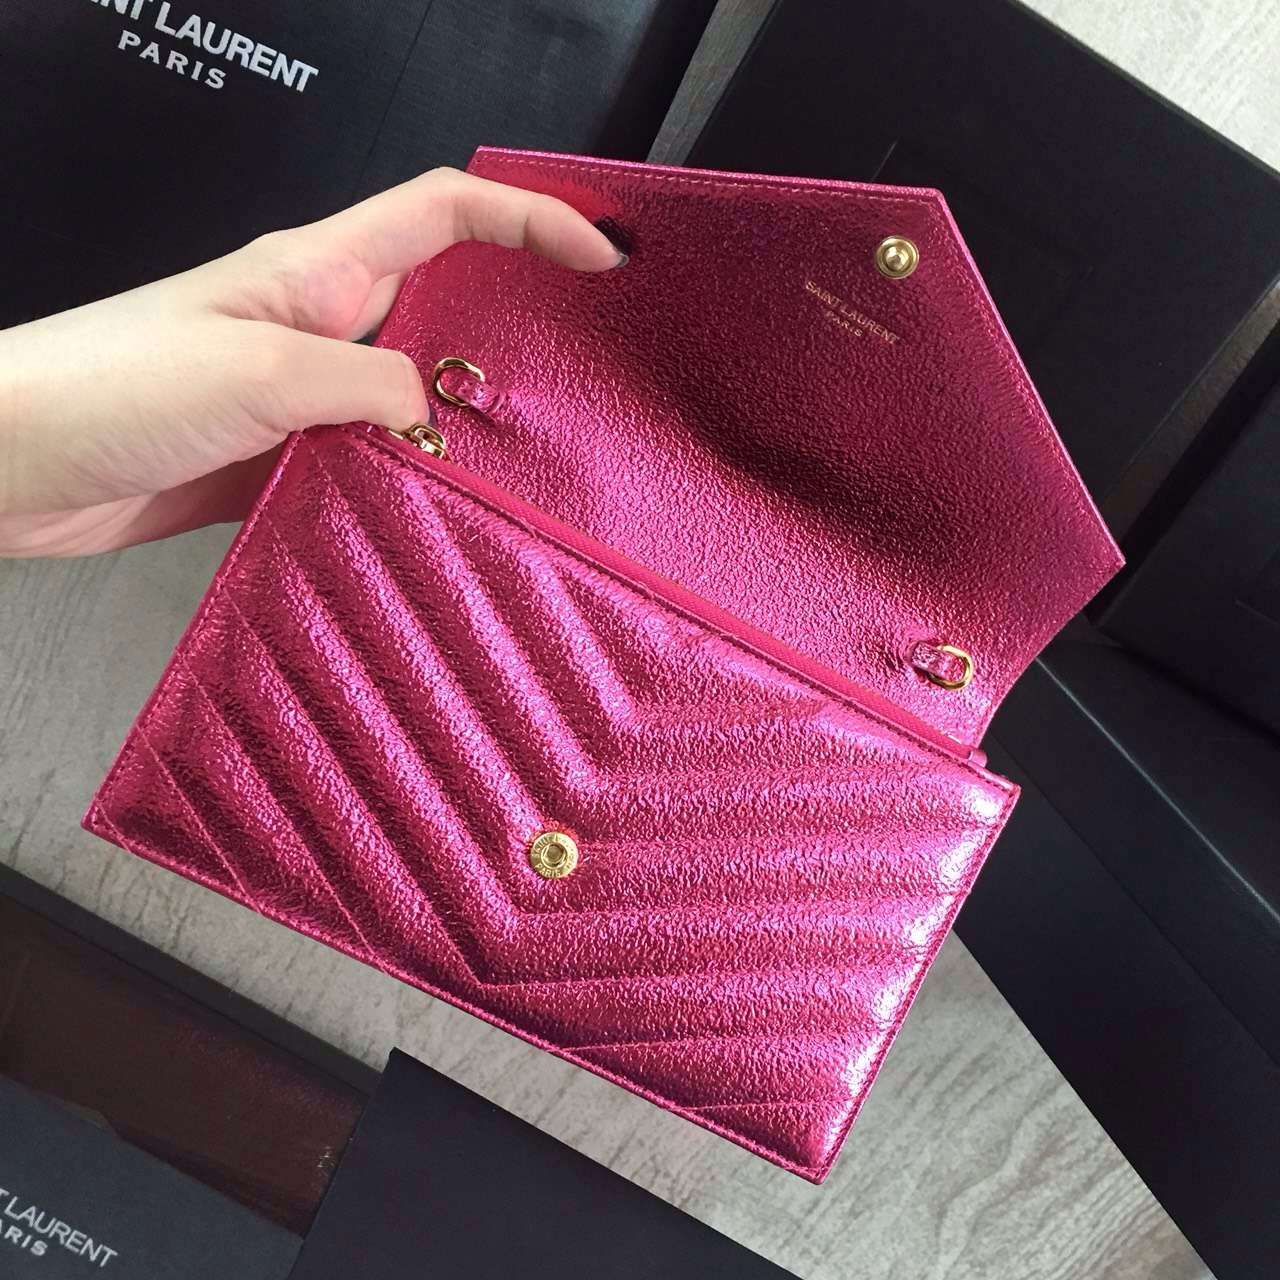 2016 Cheap YSL Out Sale with Free Shipping-Saint Laurent Monogram Envelope Chain Wallet in Lipstick Fuchsia Grained Matelasse Metallic Leather